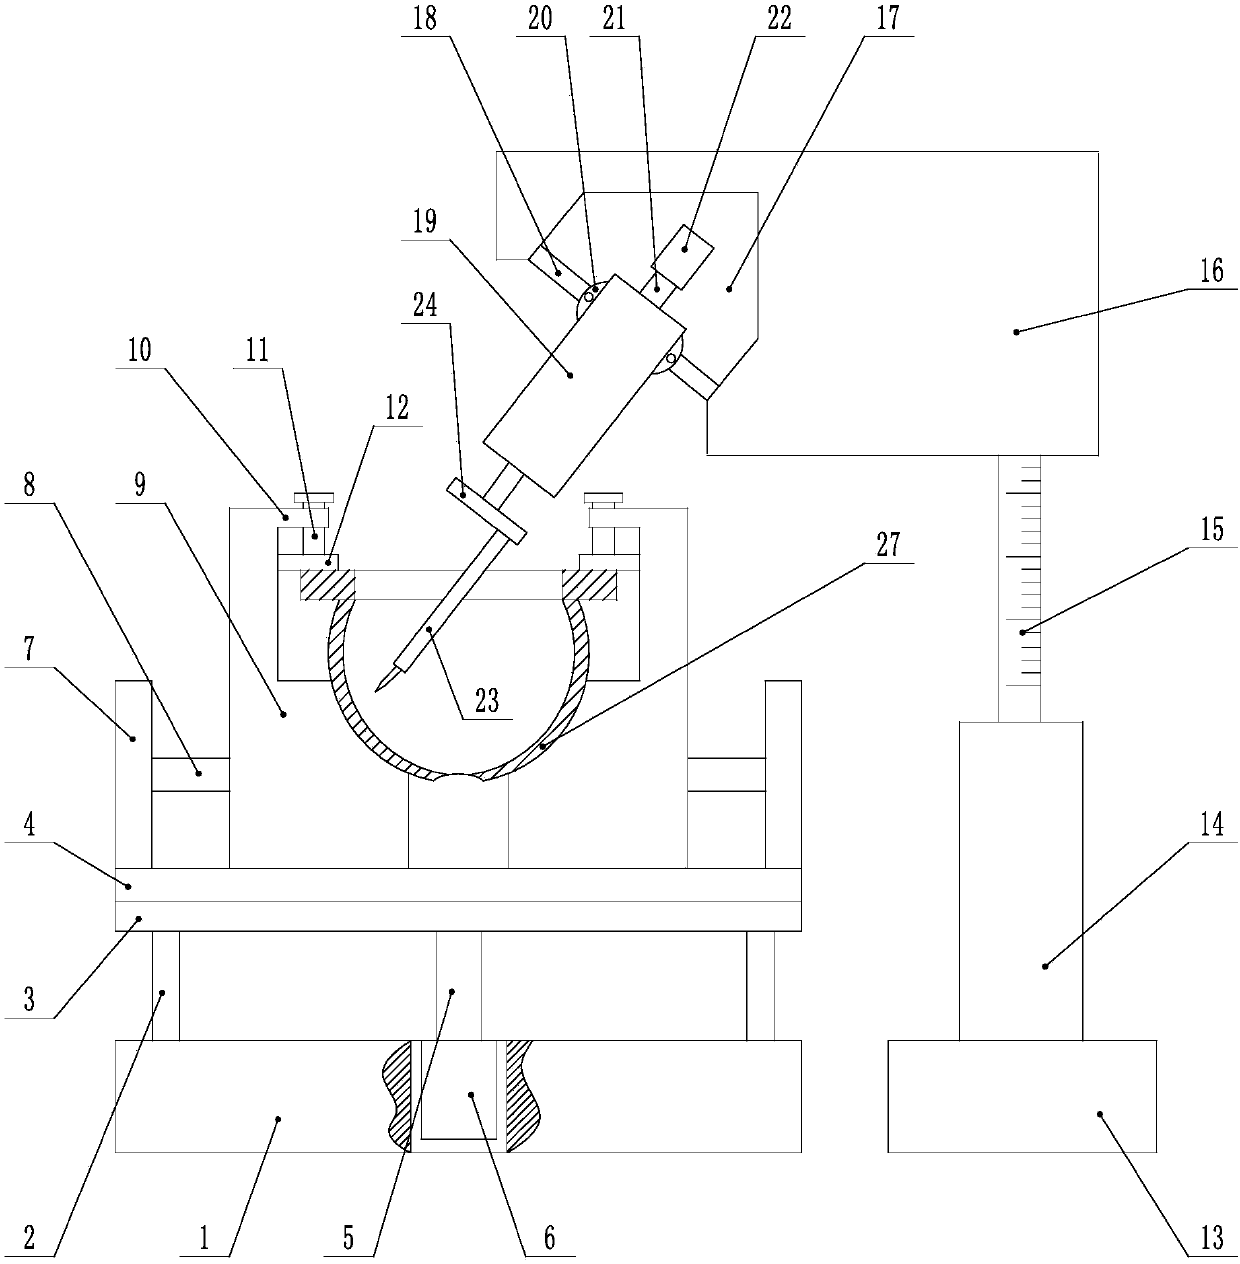 Air cylinder cover mold spraying method capable of achieving uniform spraying